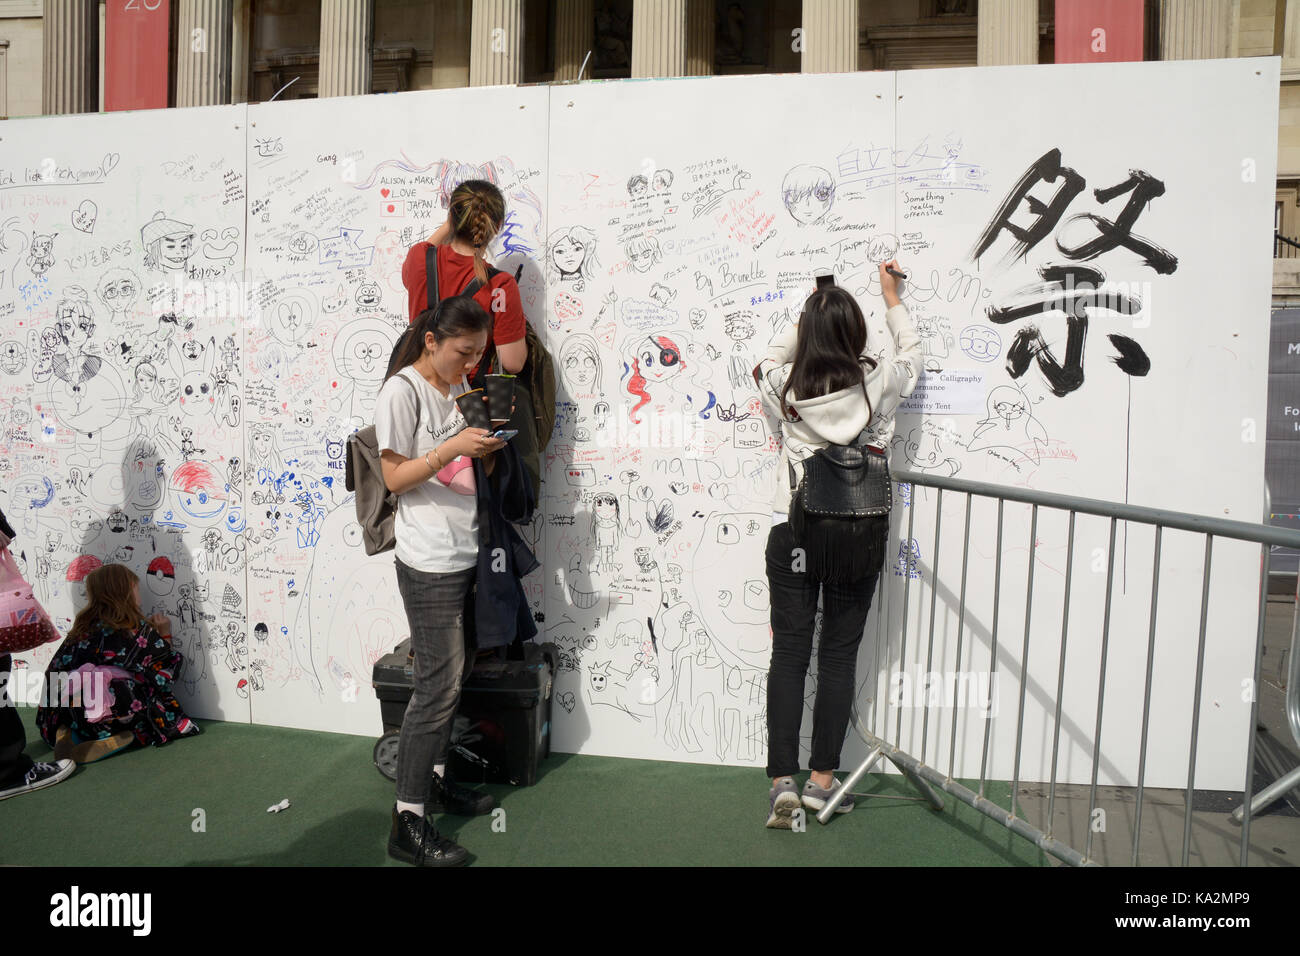 London, England. 24 September 2017: Children drawing and signing their names on the graffiti wall at the Japan Matsuri Festival in Trafalgar Square, London England. Martin Parker/Alamy Live News Stock Photo